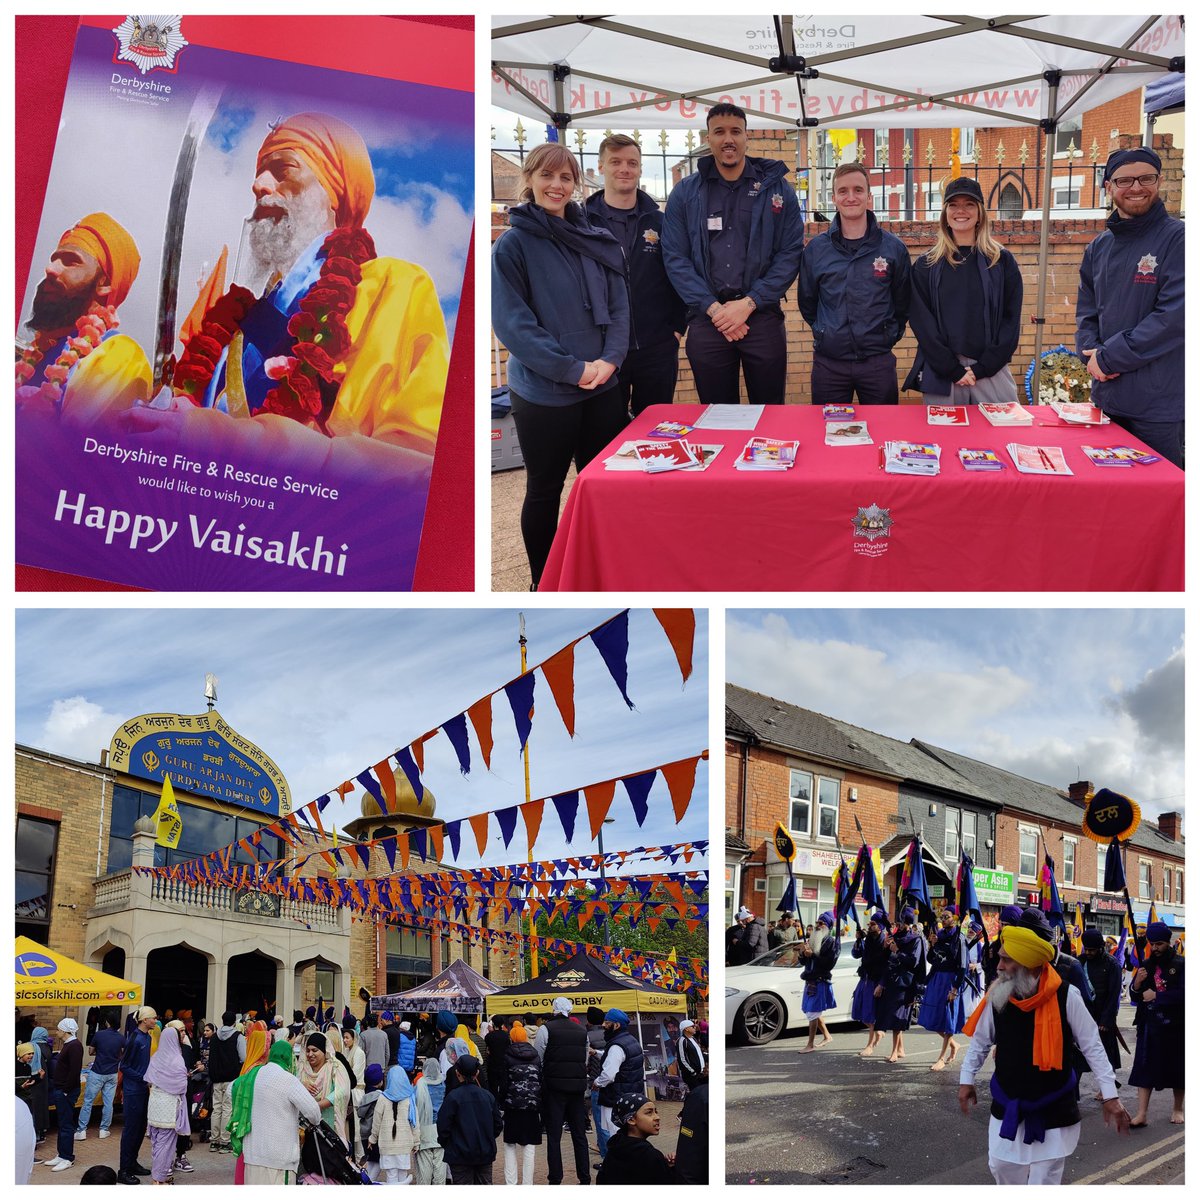 Wonderful Vaisakhi celebration! Thank you to the community for having us and all the colleagues supporting the event and sharing safety messages over the weekend! @DerbyshireFRS